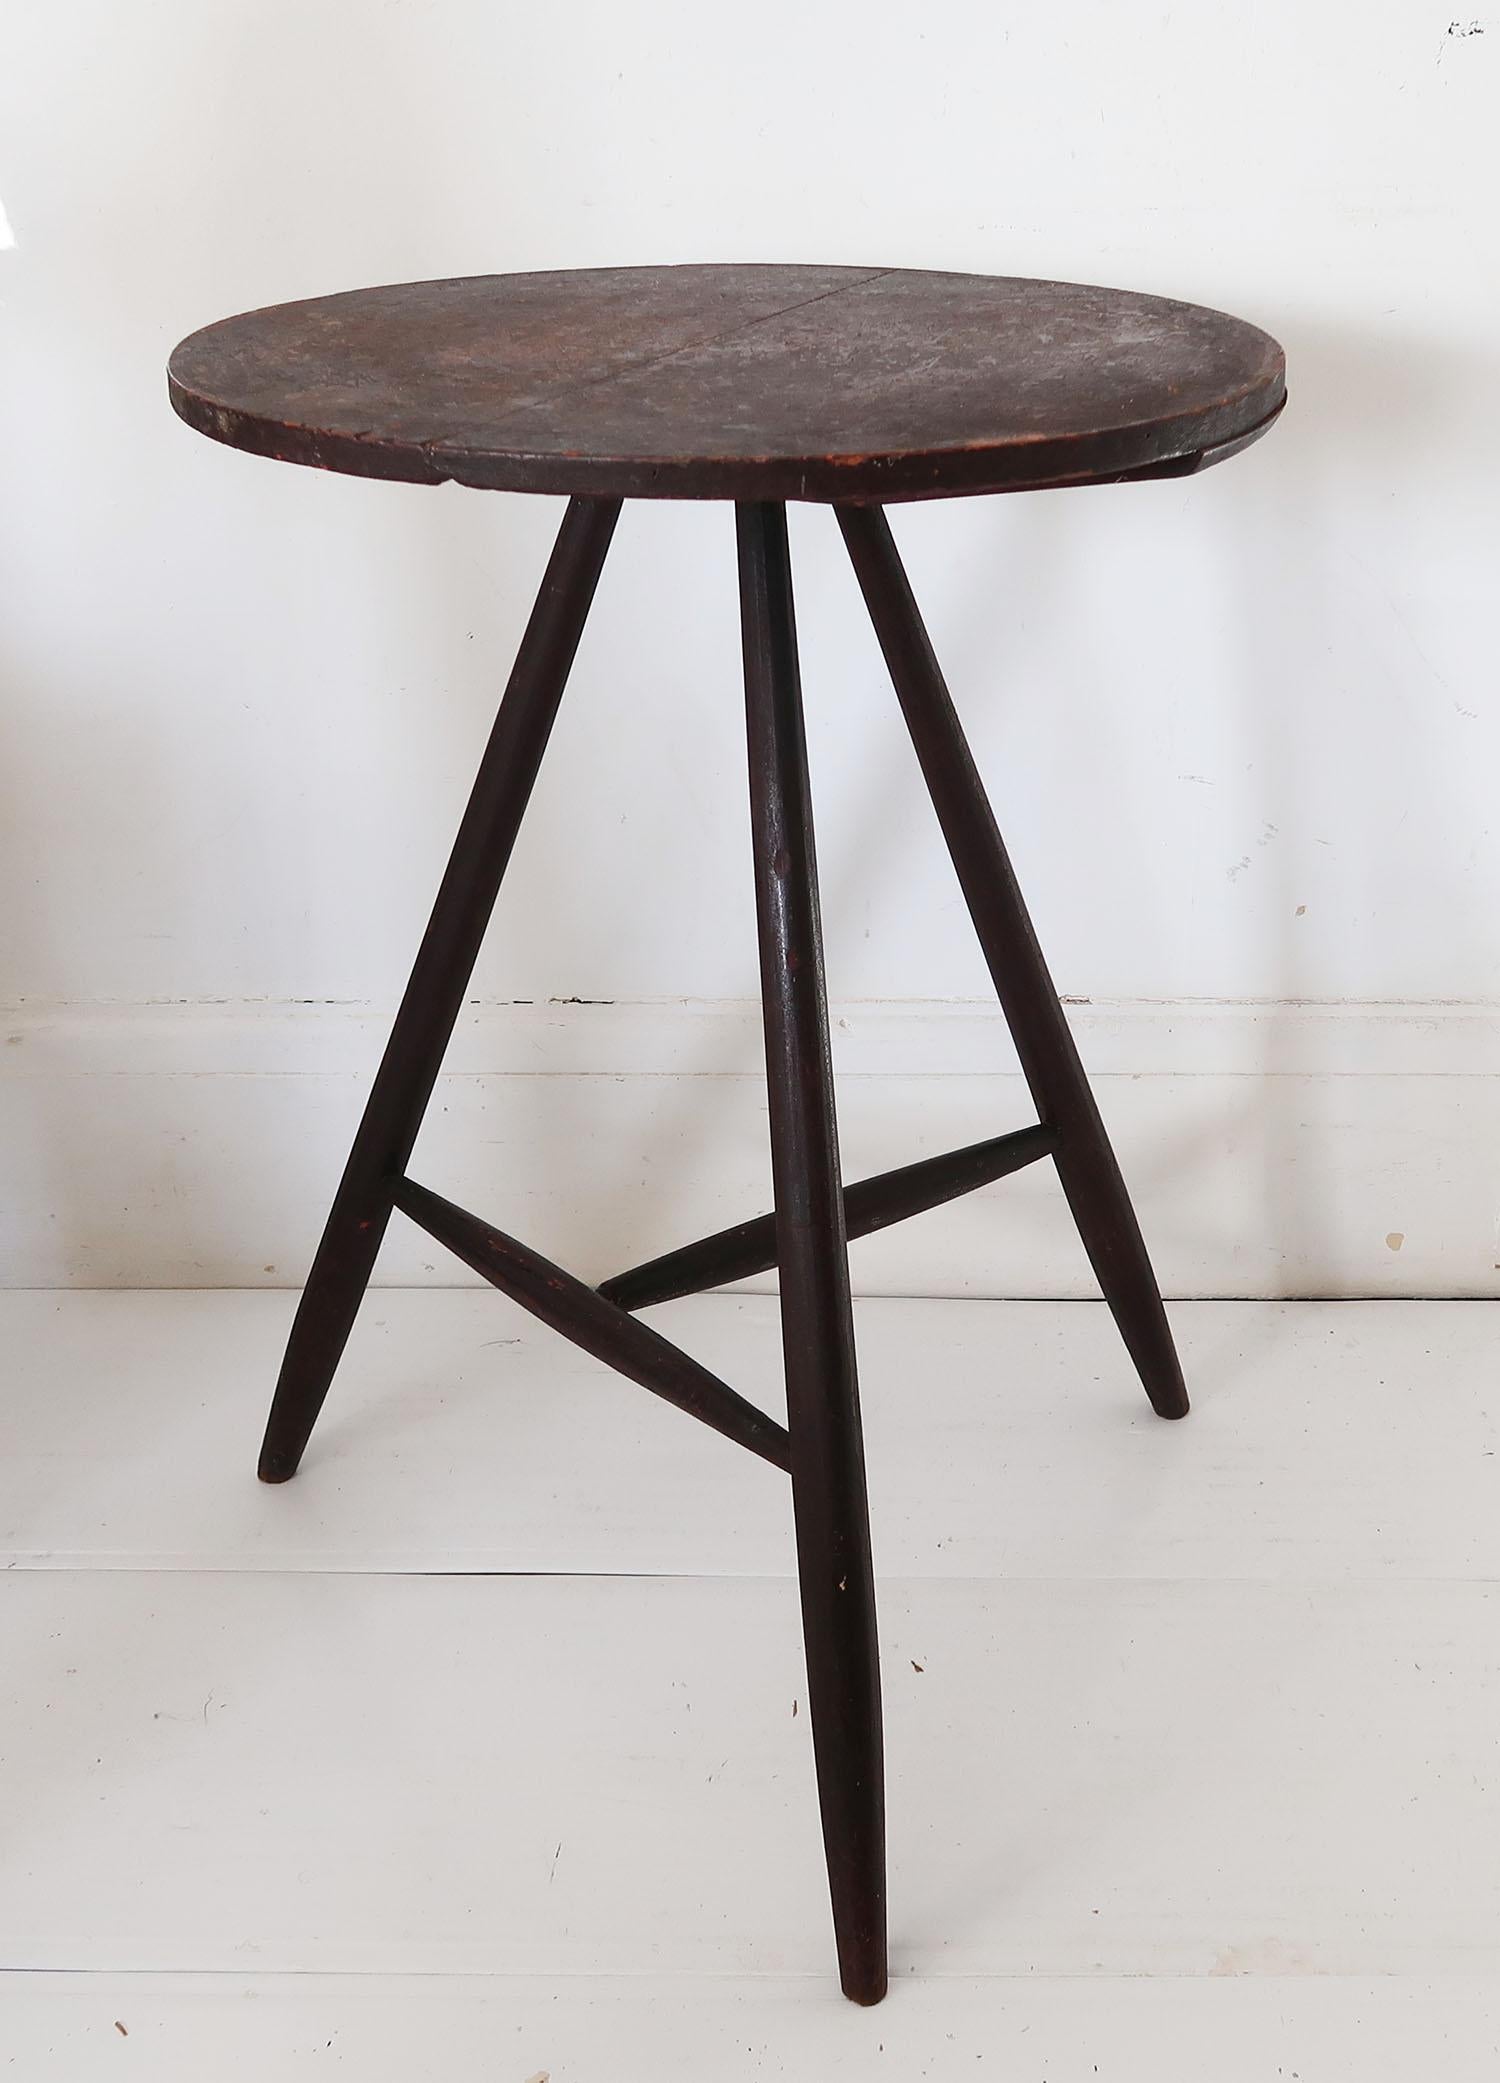 Fabulous small round table. Original ox-blood colour paint.

On pine.

Very honest piece. Most likely Welsh

Totally original patina

I particularly like the unusual angle of the legs.










 